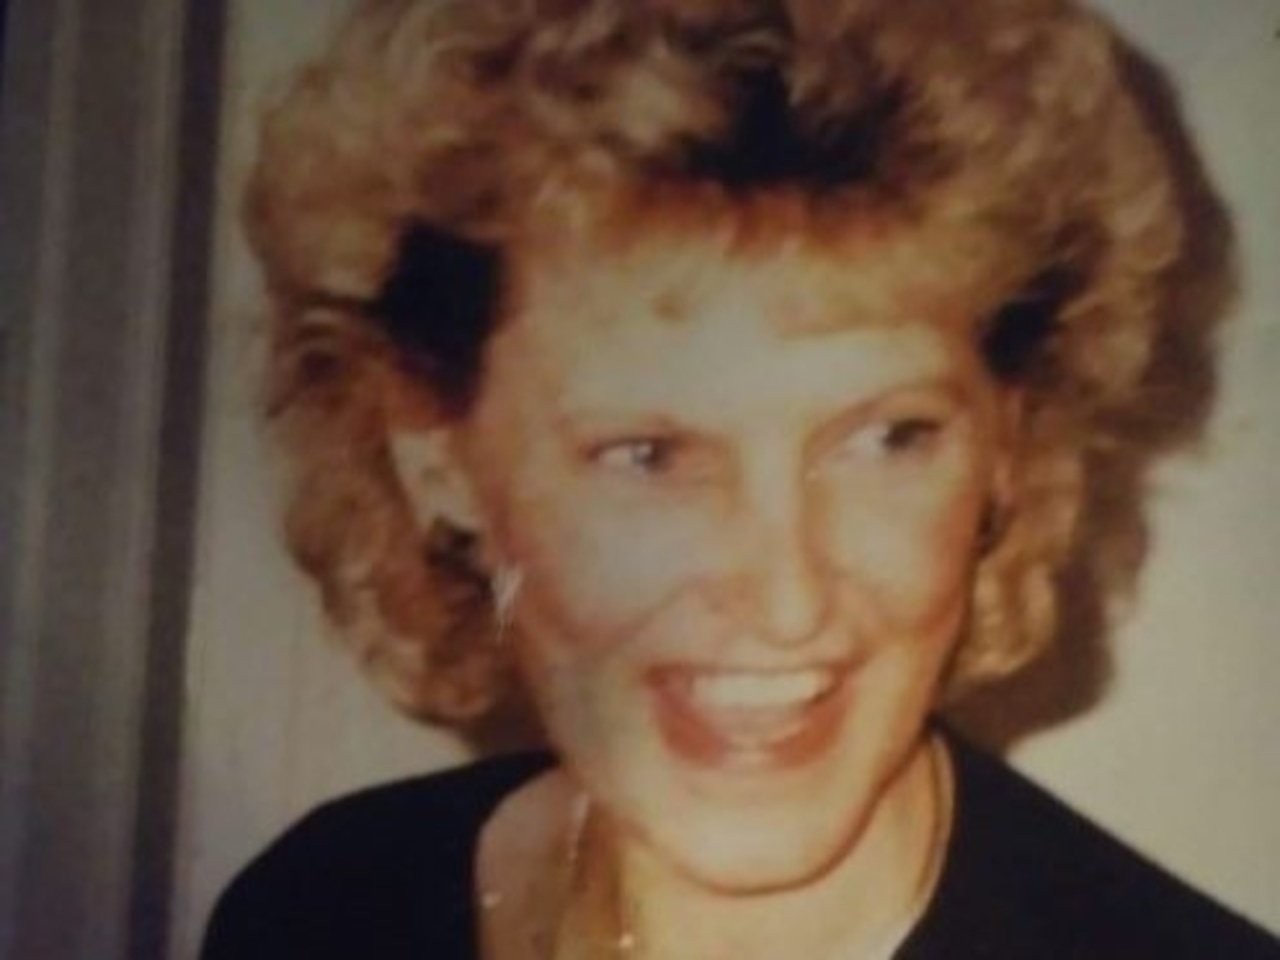 Police seek new clues in 1989 cold case murder of mother of 5 [Video]